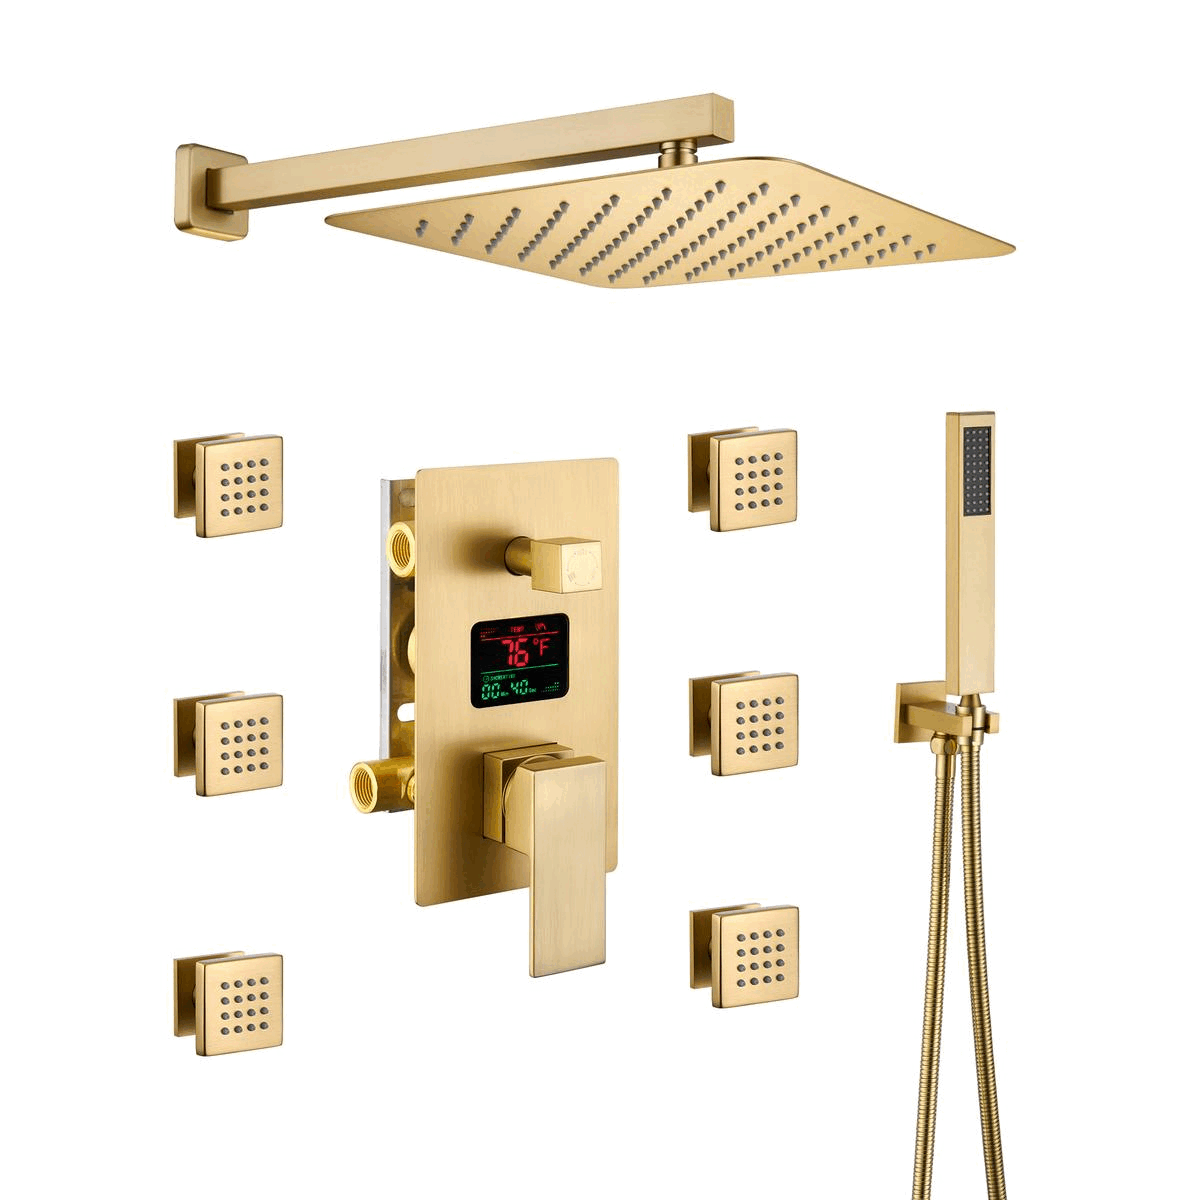 The Digital Display Rain Shower System is available in three stunning finish colors: Black, Brush Gold, and Nickel Brush. 